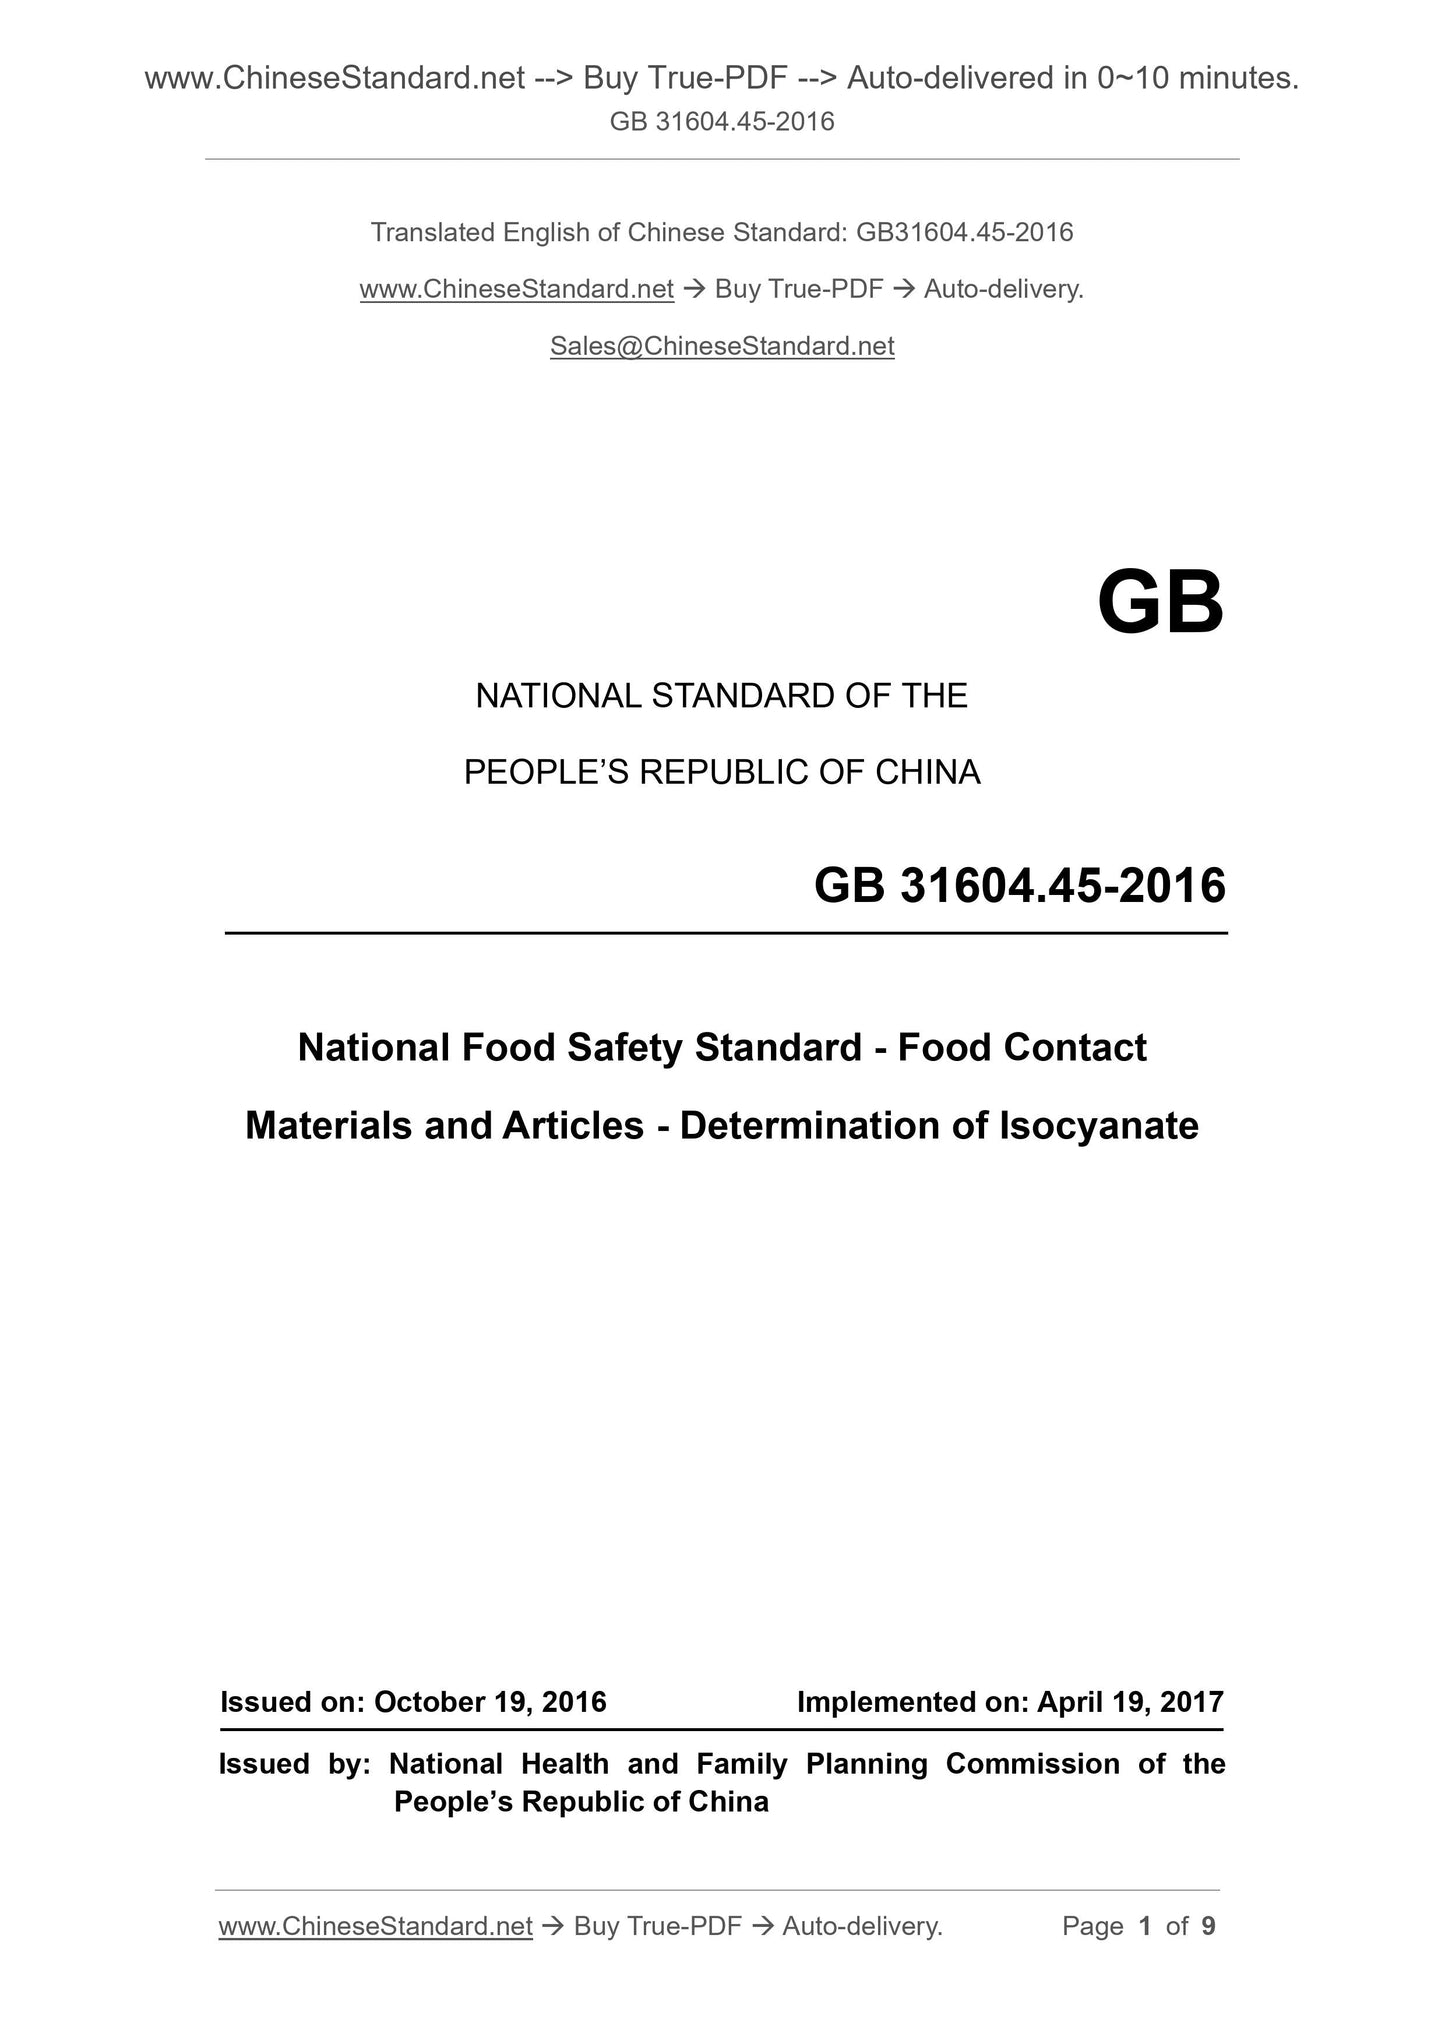 GB 31604.45-2016 Page 1